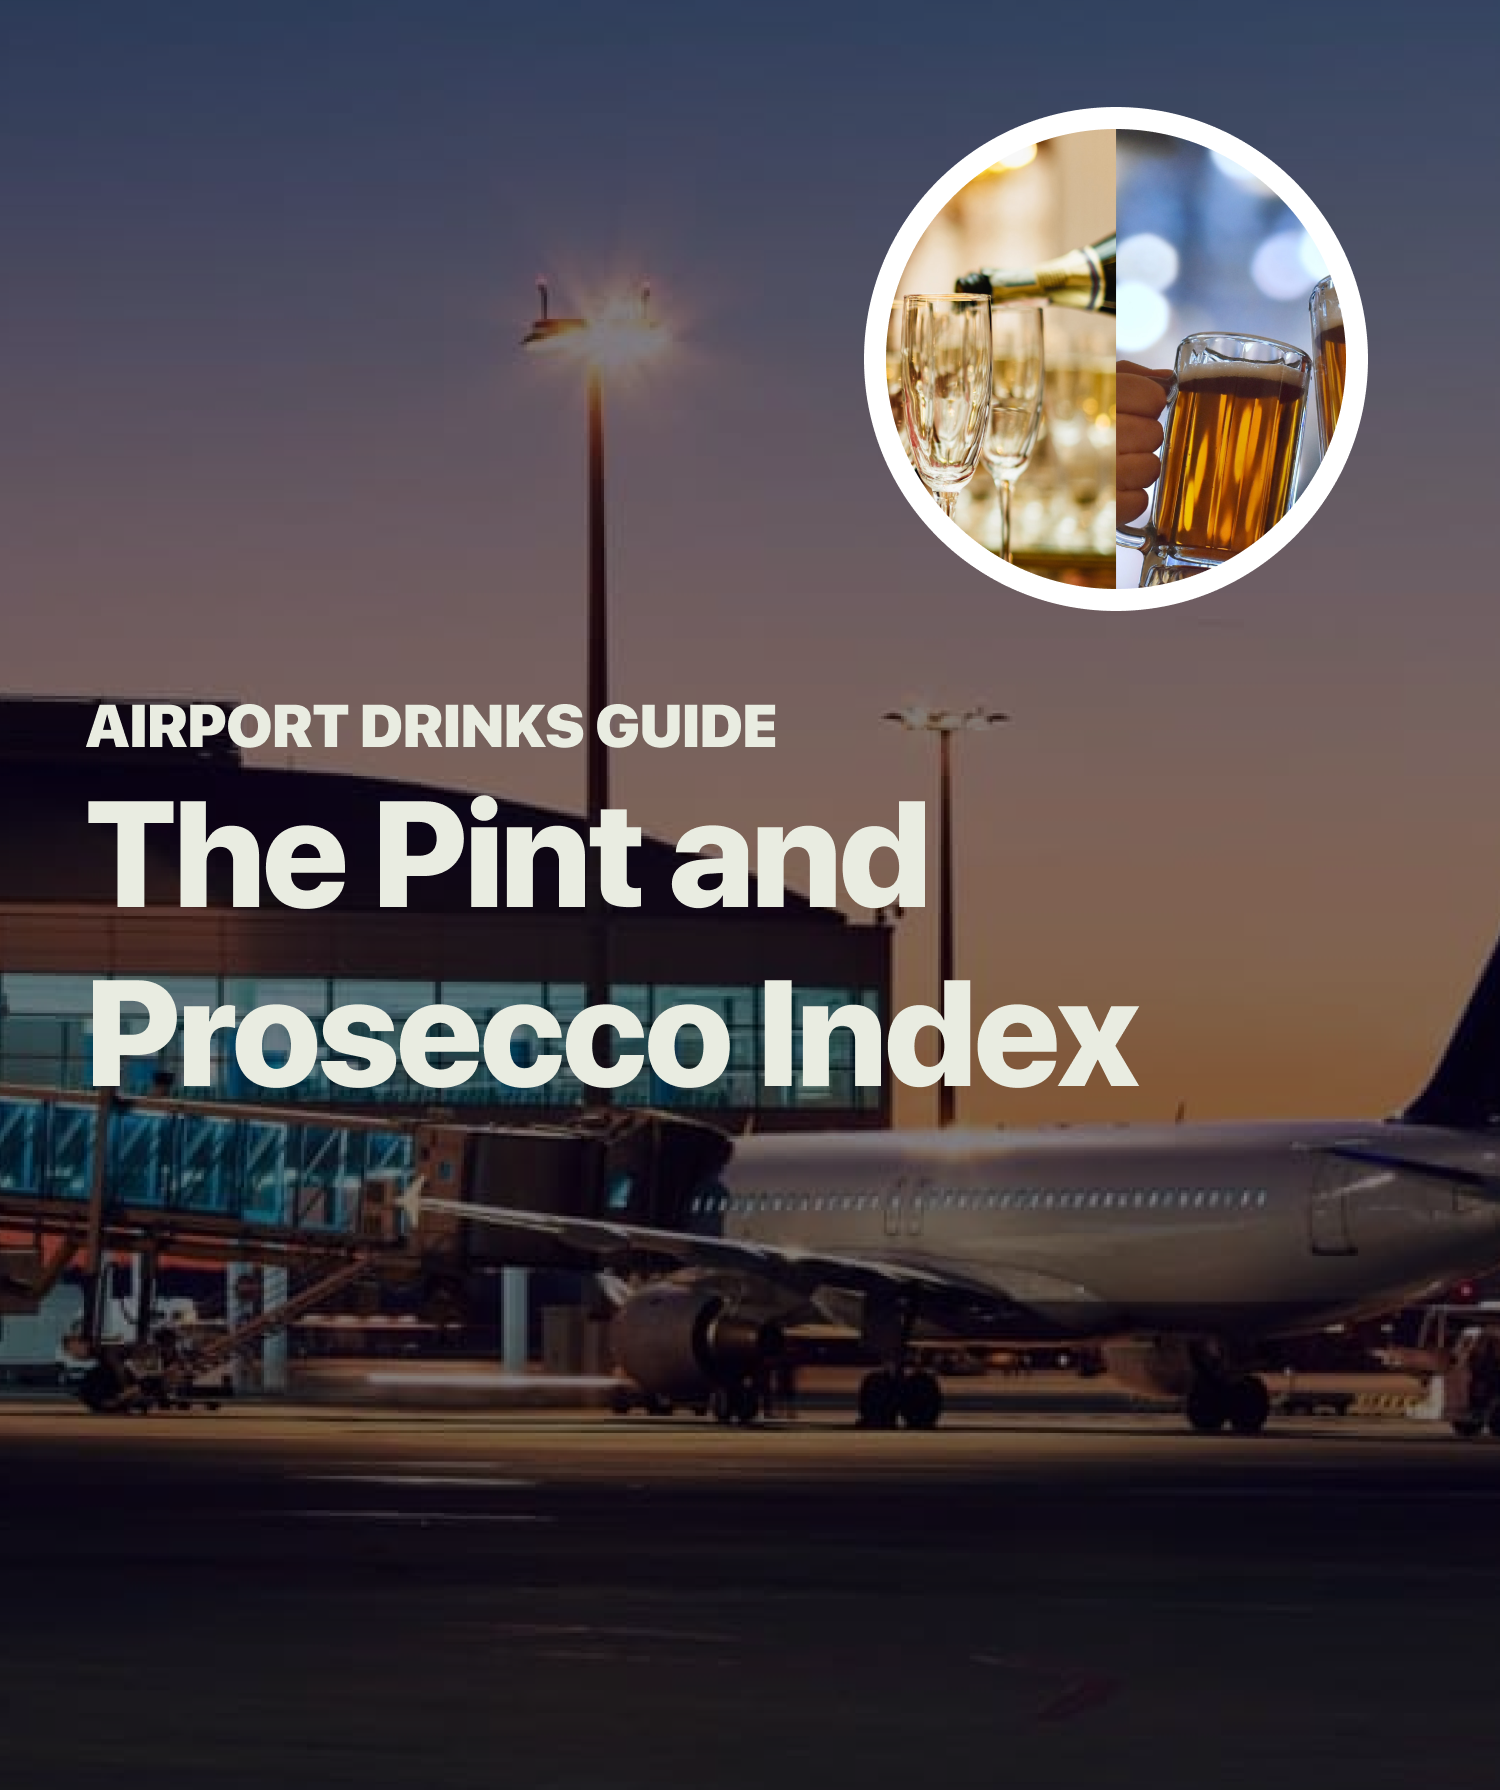 The Pint and Prosecco Index: Your Guide to Pre-Flight Beverages